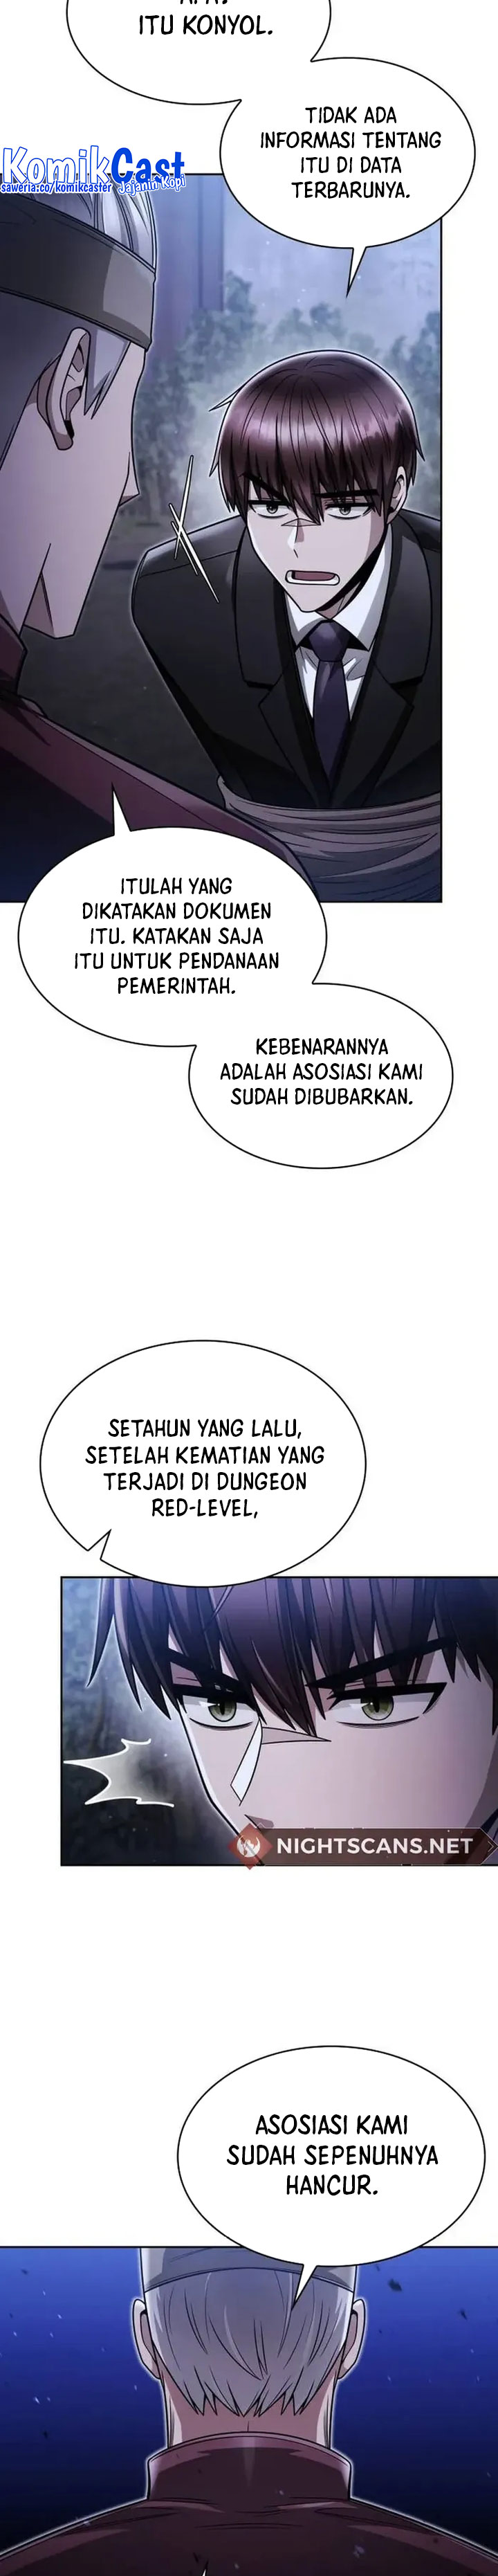 Dilarang COPAS - situs resmi www.mangacanblog.com - Komik clever cleaning life of the returned genius hunter 058 - chapter 58 59 Indonesia clever cleaning life of the returned genius hunter 058 - chapter 58 Terbaru 26|Baca Manga Komik Indonesia|Mangacan